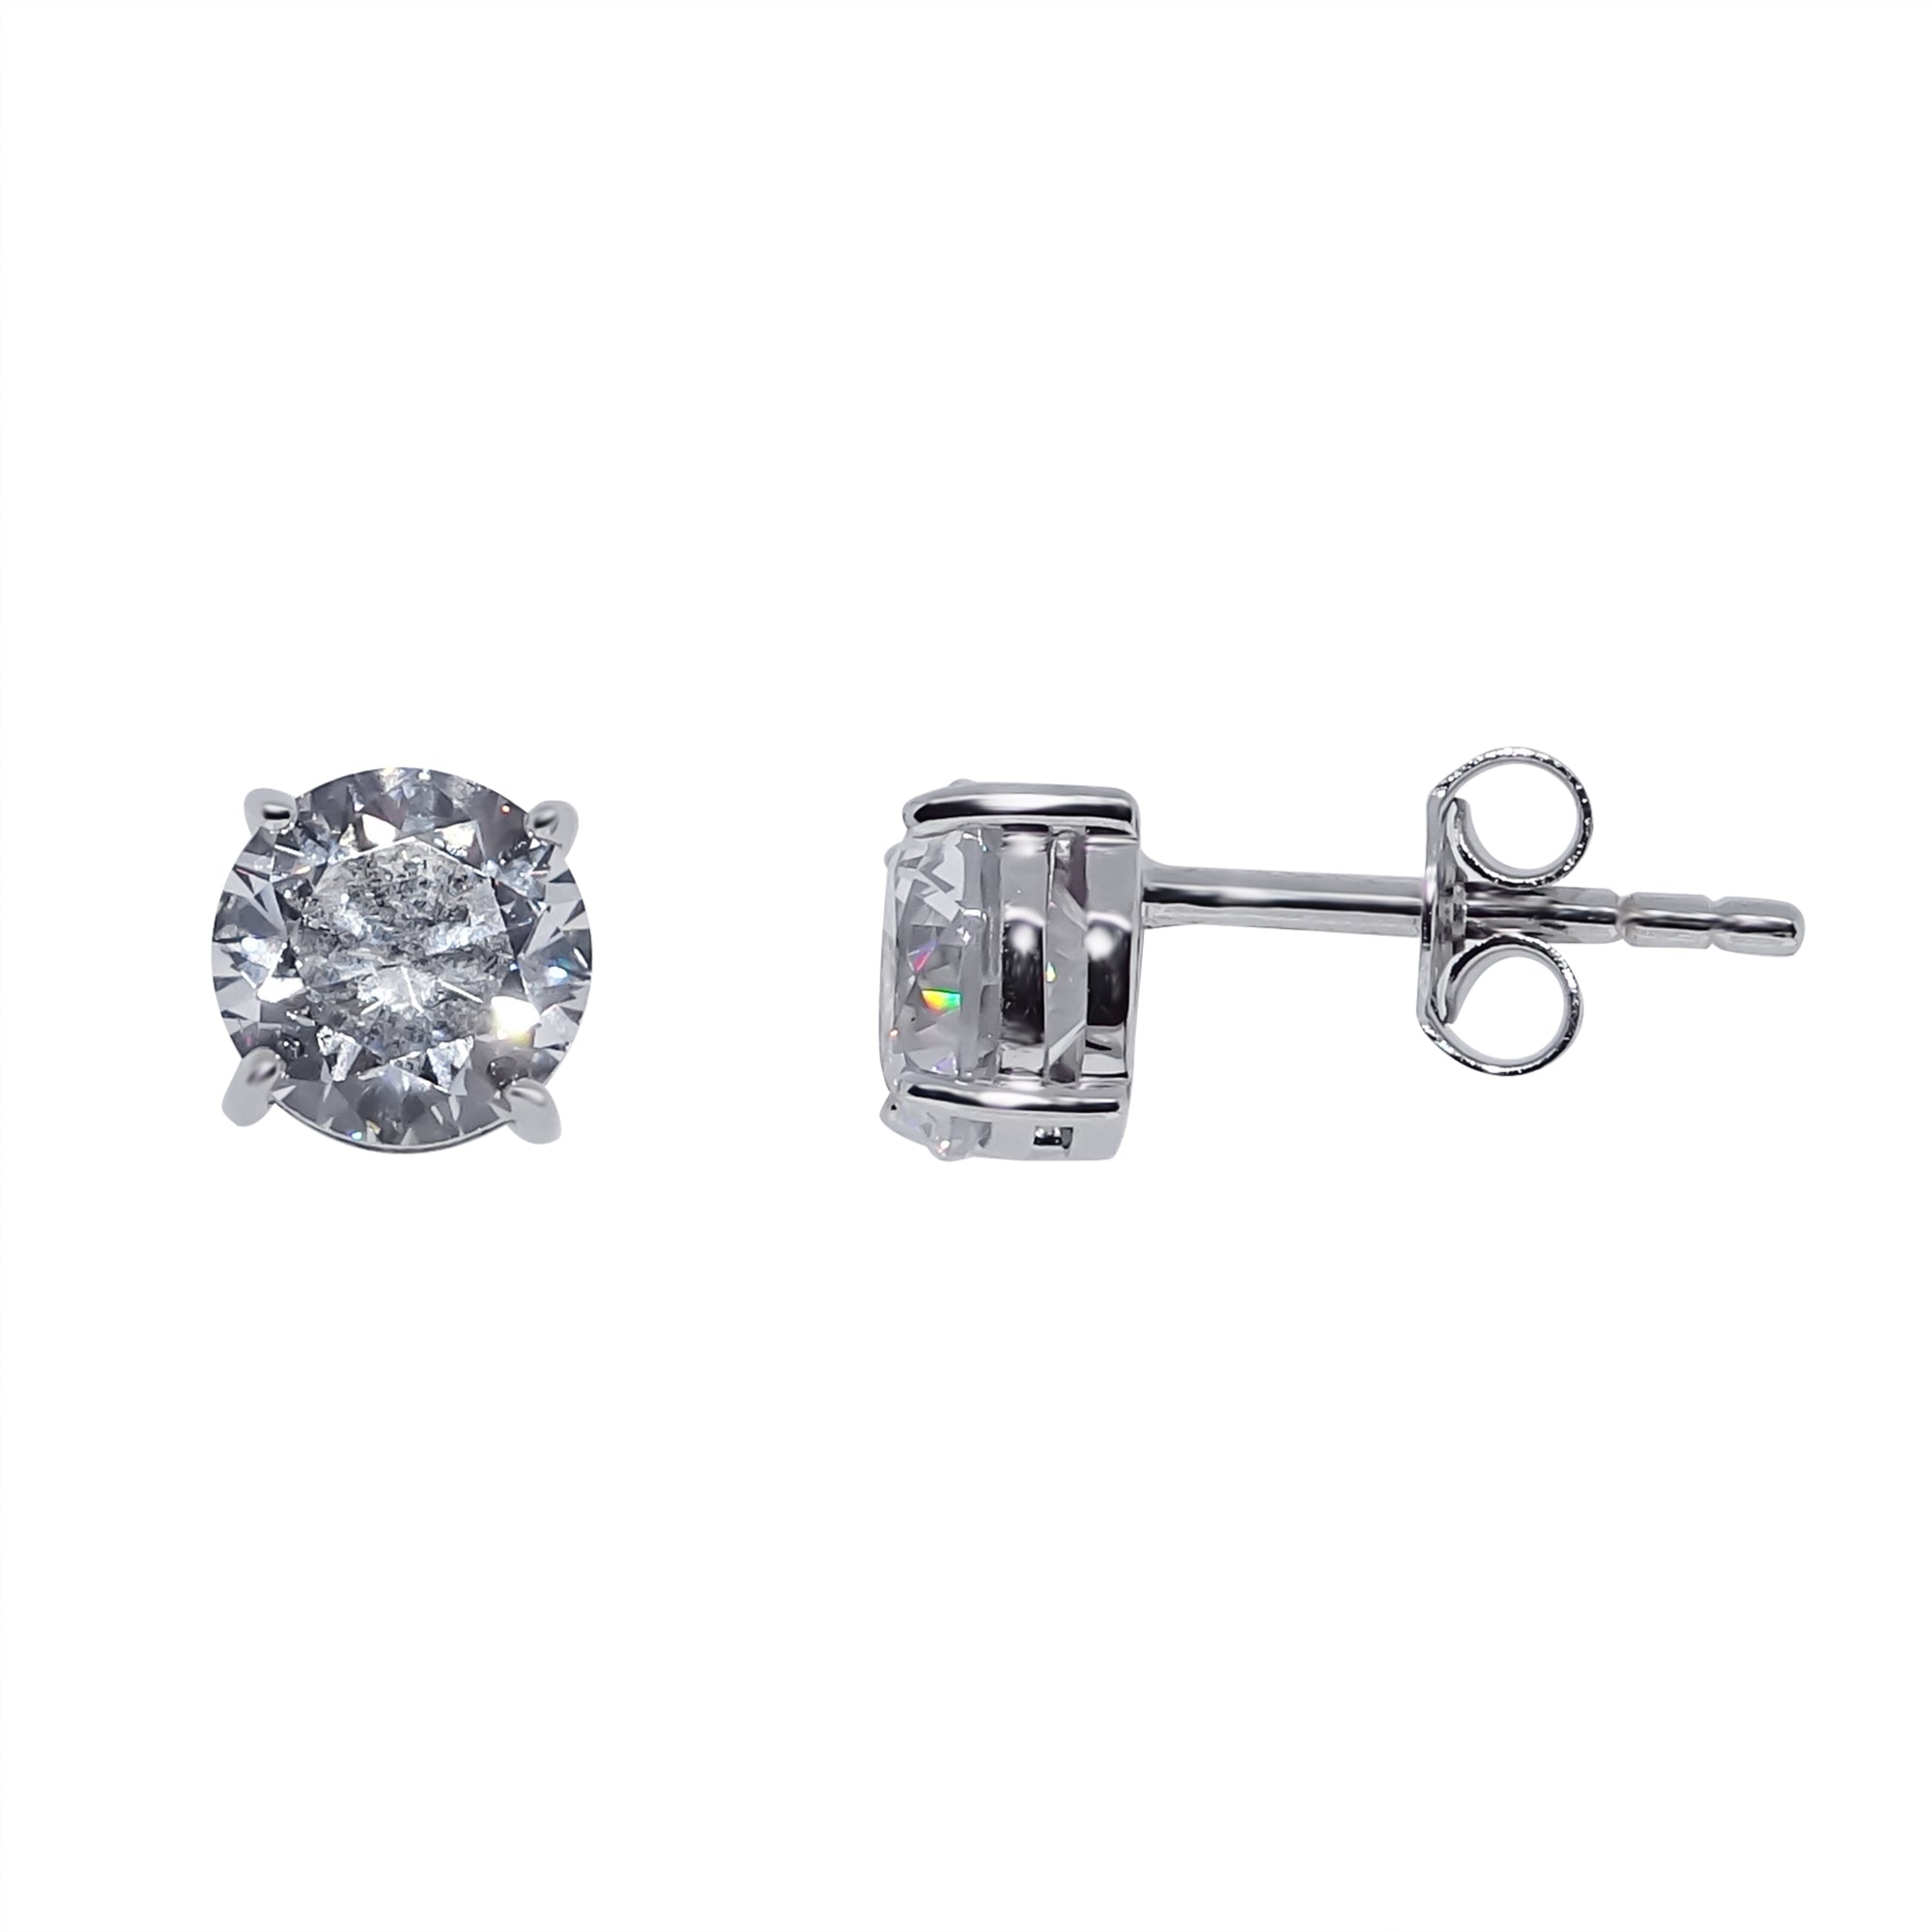 9ct white gold 6mm round cz stud earrings